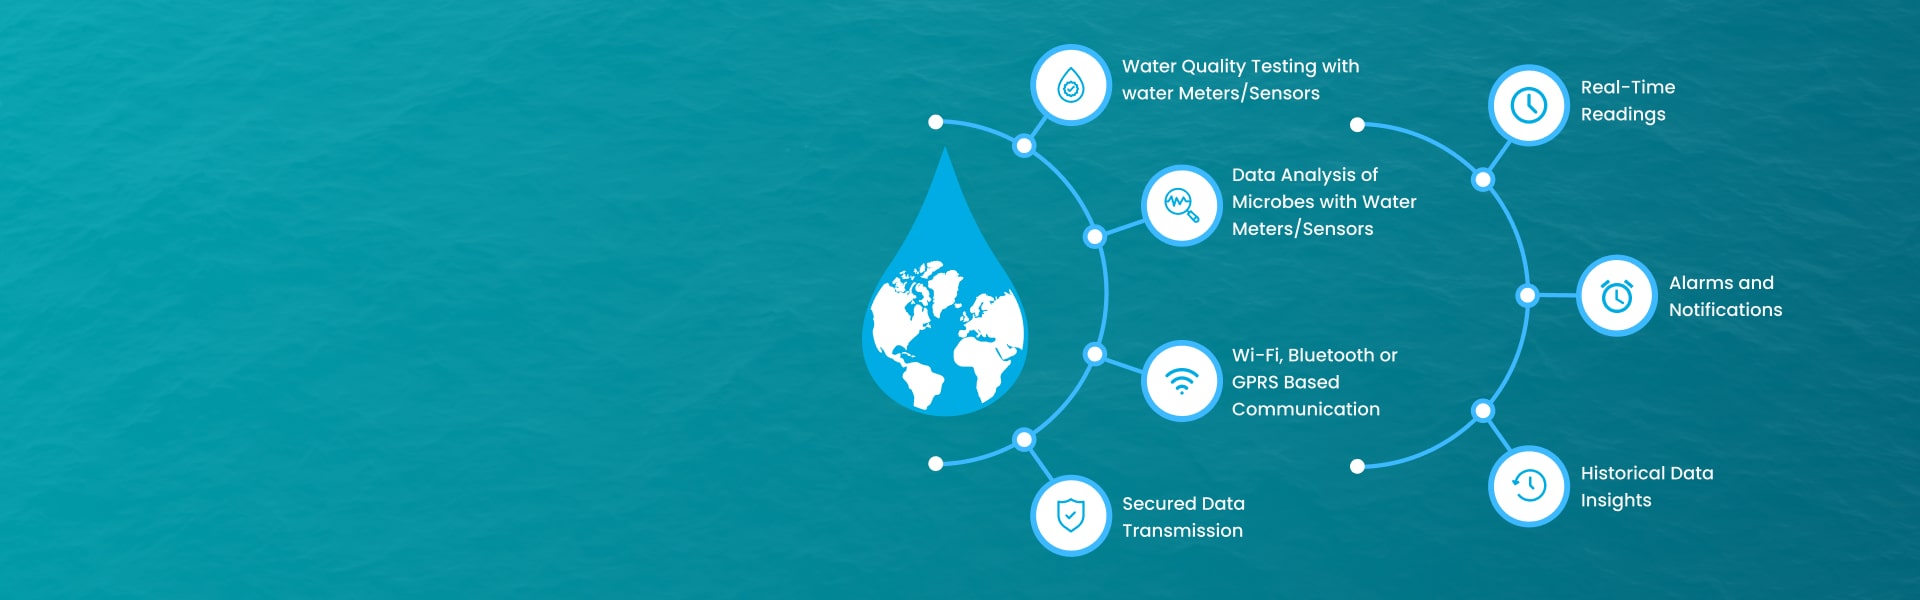 Smarten your Water Quality Management Operations with IoT-powered Solutions